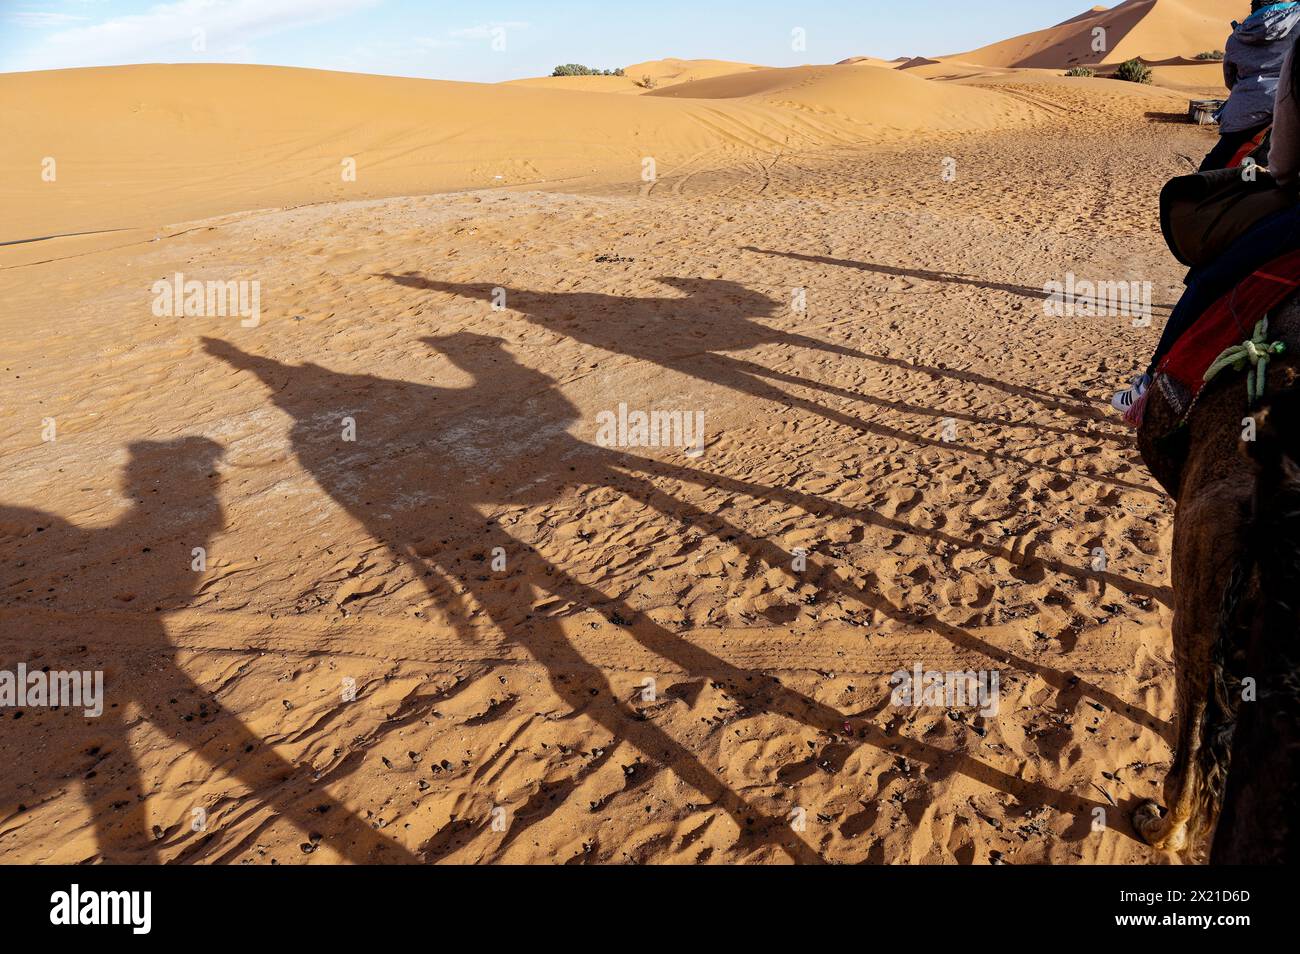 Captured from atop a camel, the late afternoon sun casts elongated shadows of three camels and their riders, alongside our guide's thin silhouette. Stock Photo